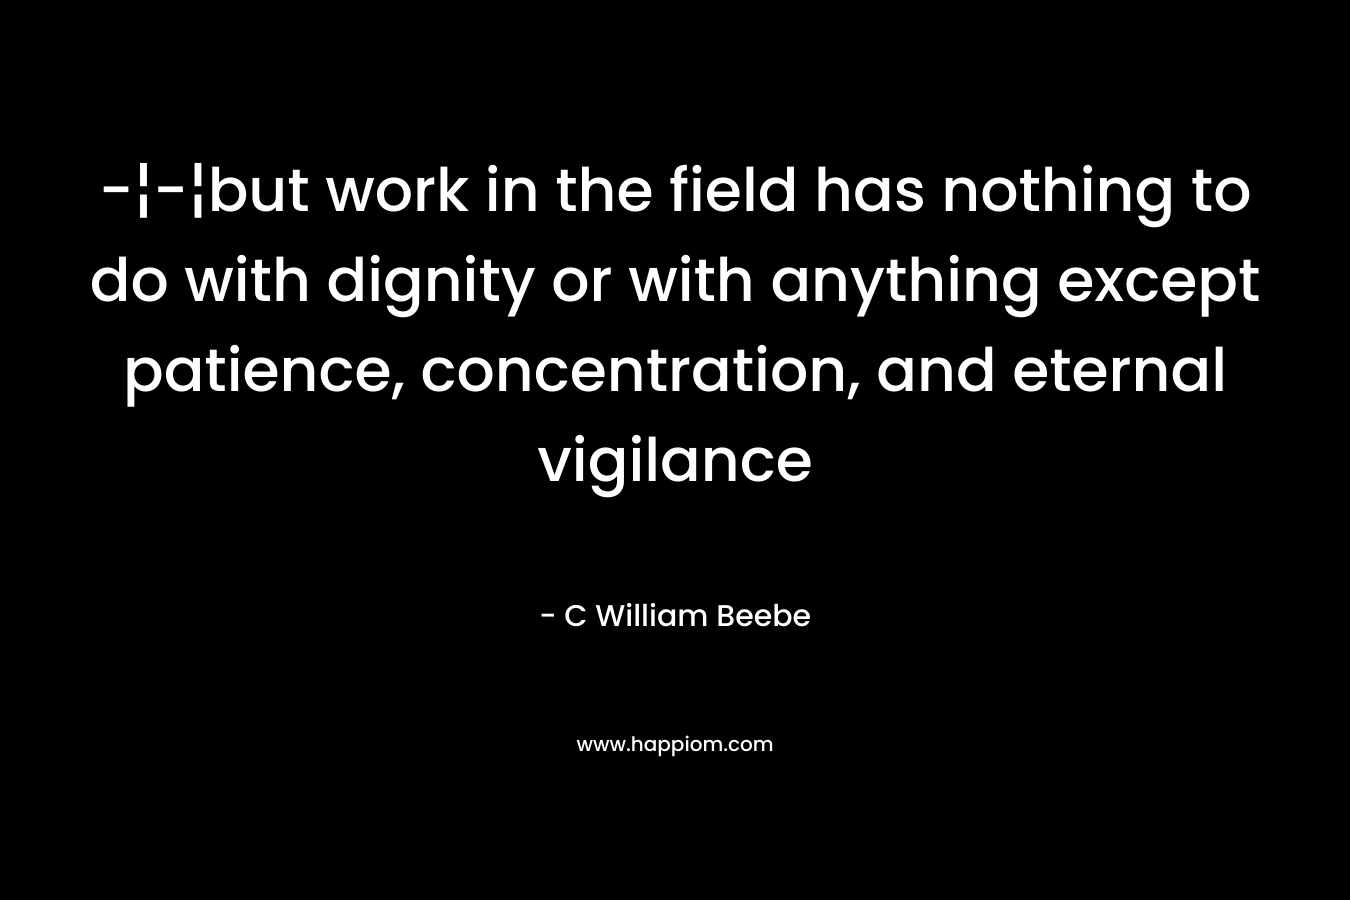 -¦-¦but work in the field has nothing to do with dignity or with anything except patience, concentration, and eternal vigilance